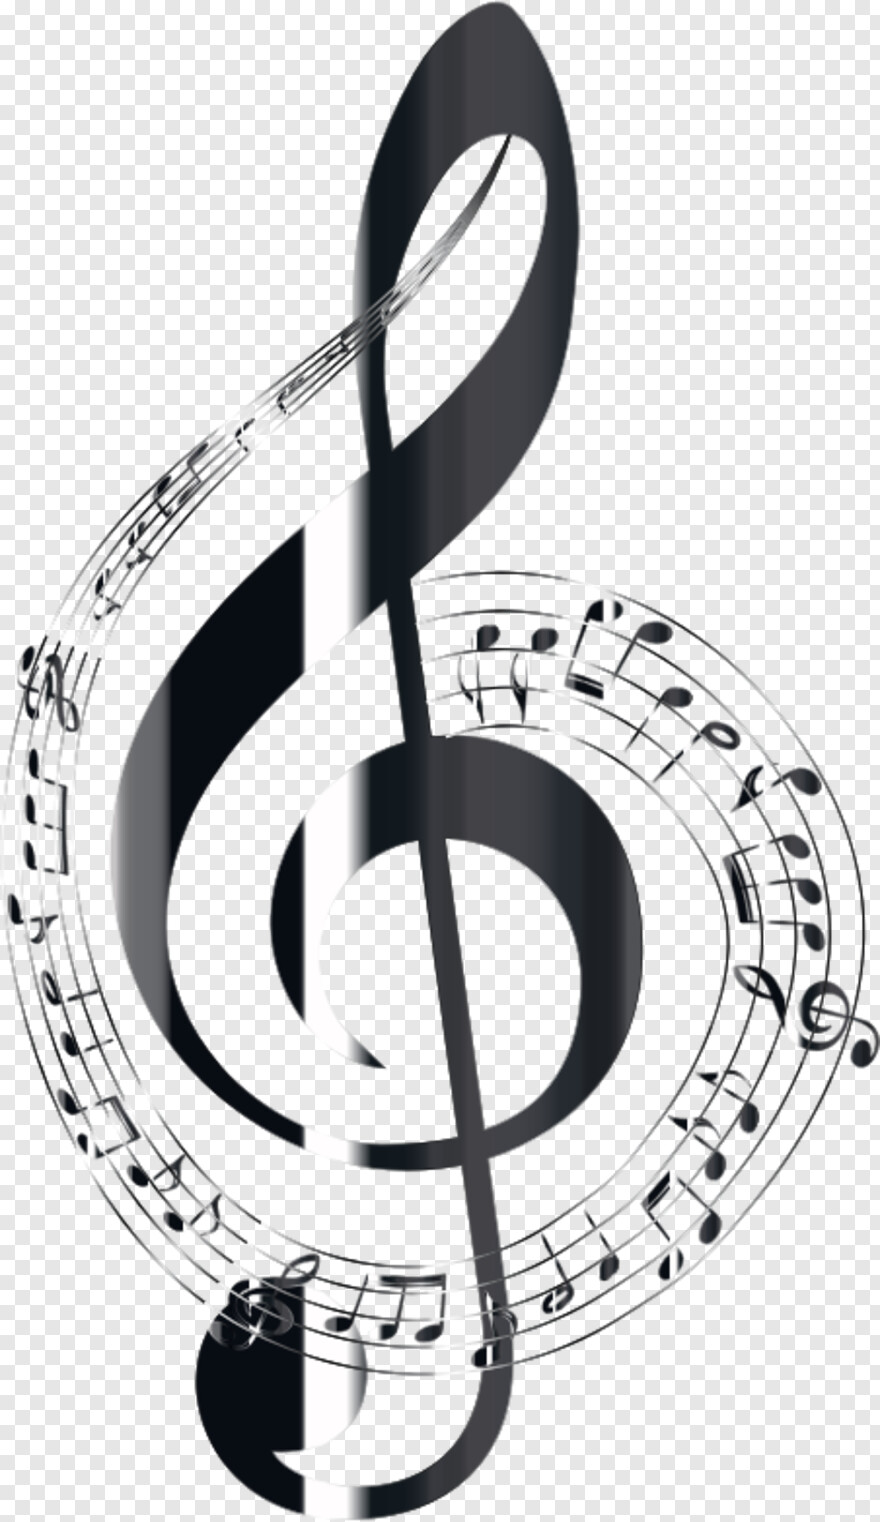 white-music-notes # 683353